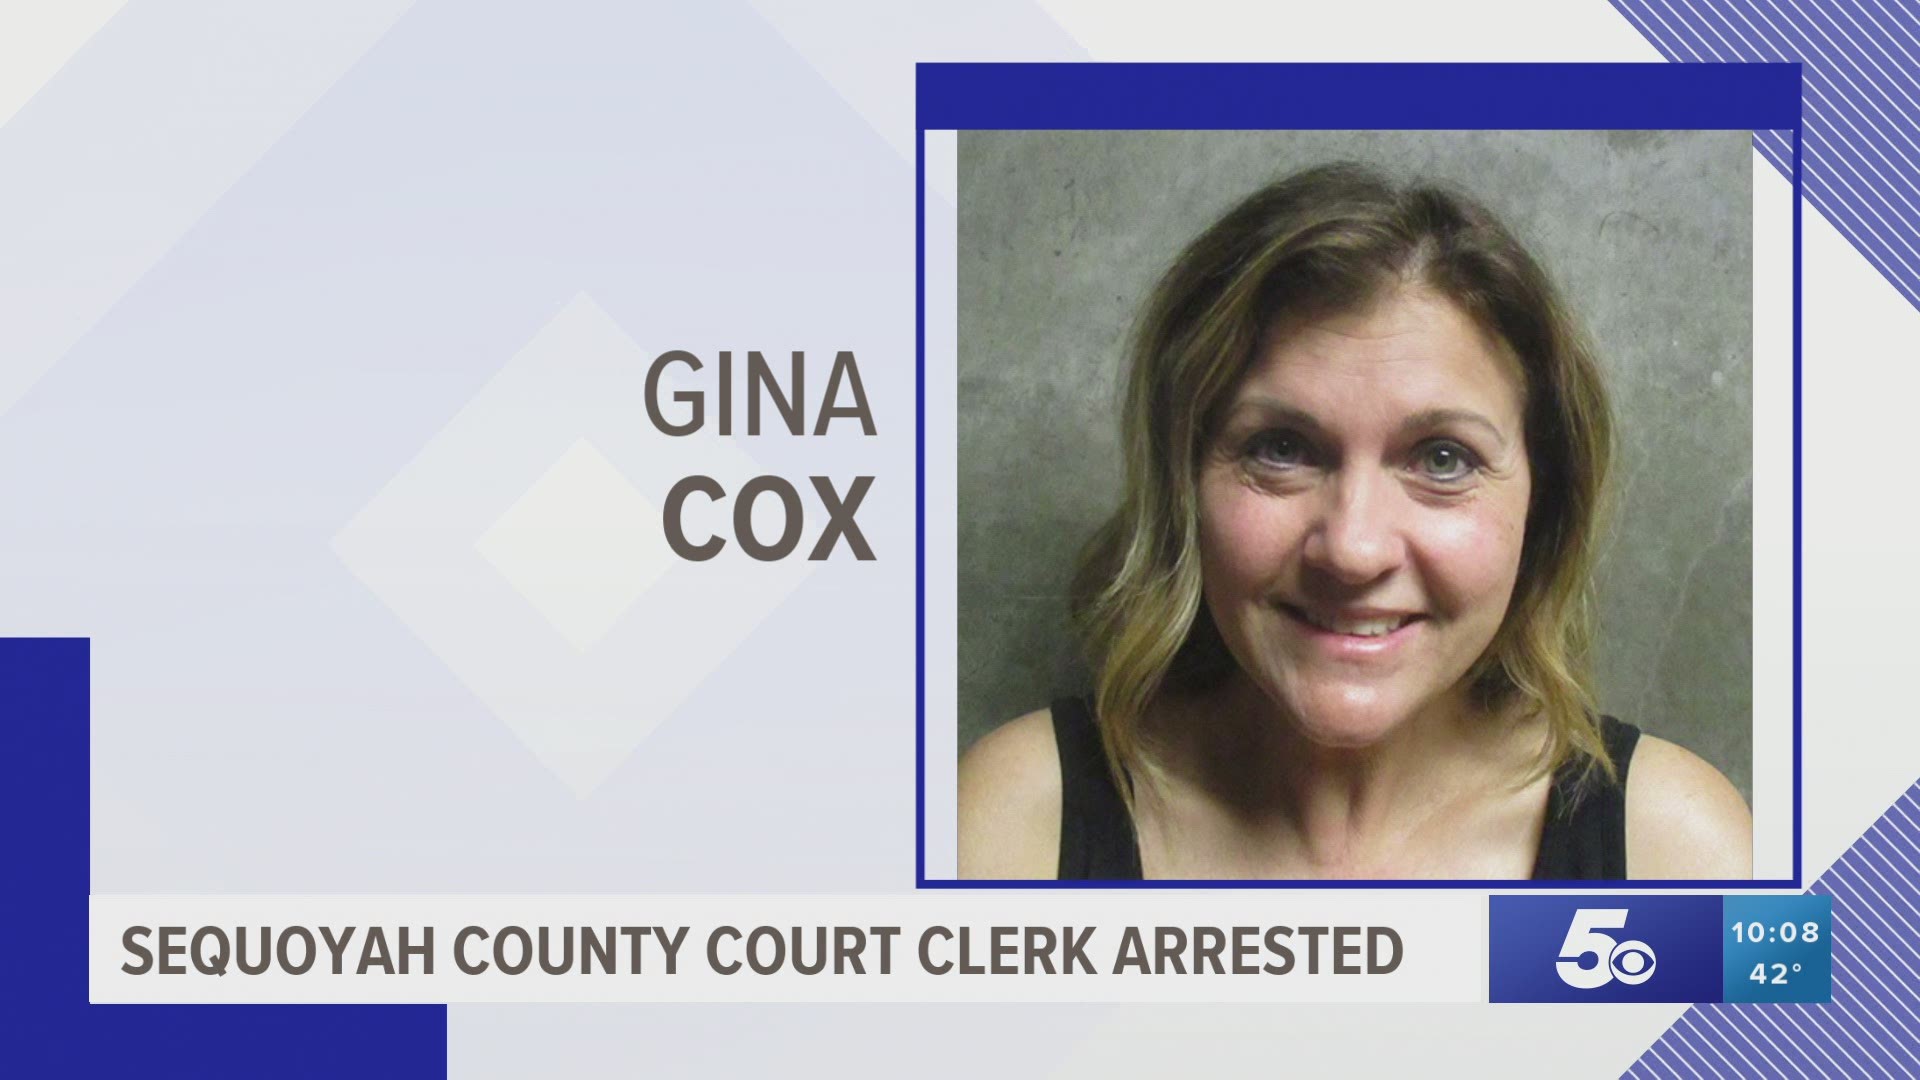 Sequoyah County Court Clerk arrested on multiple charges